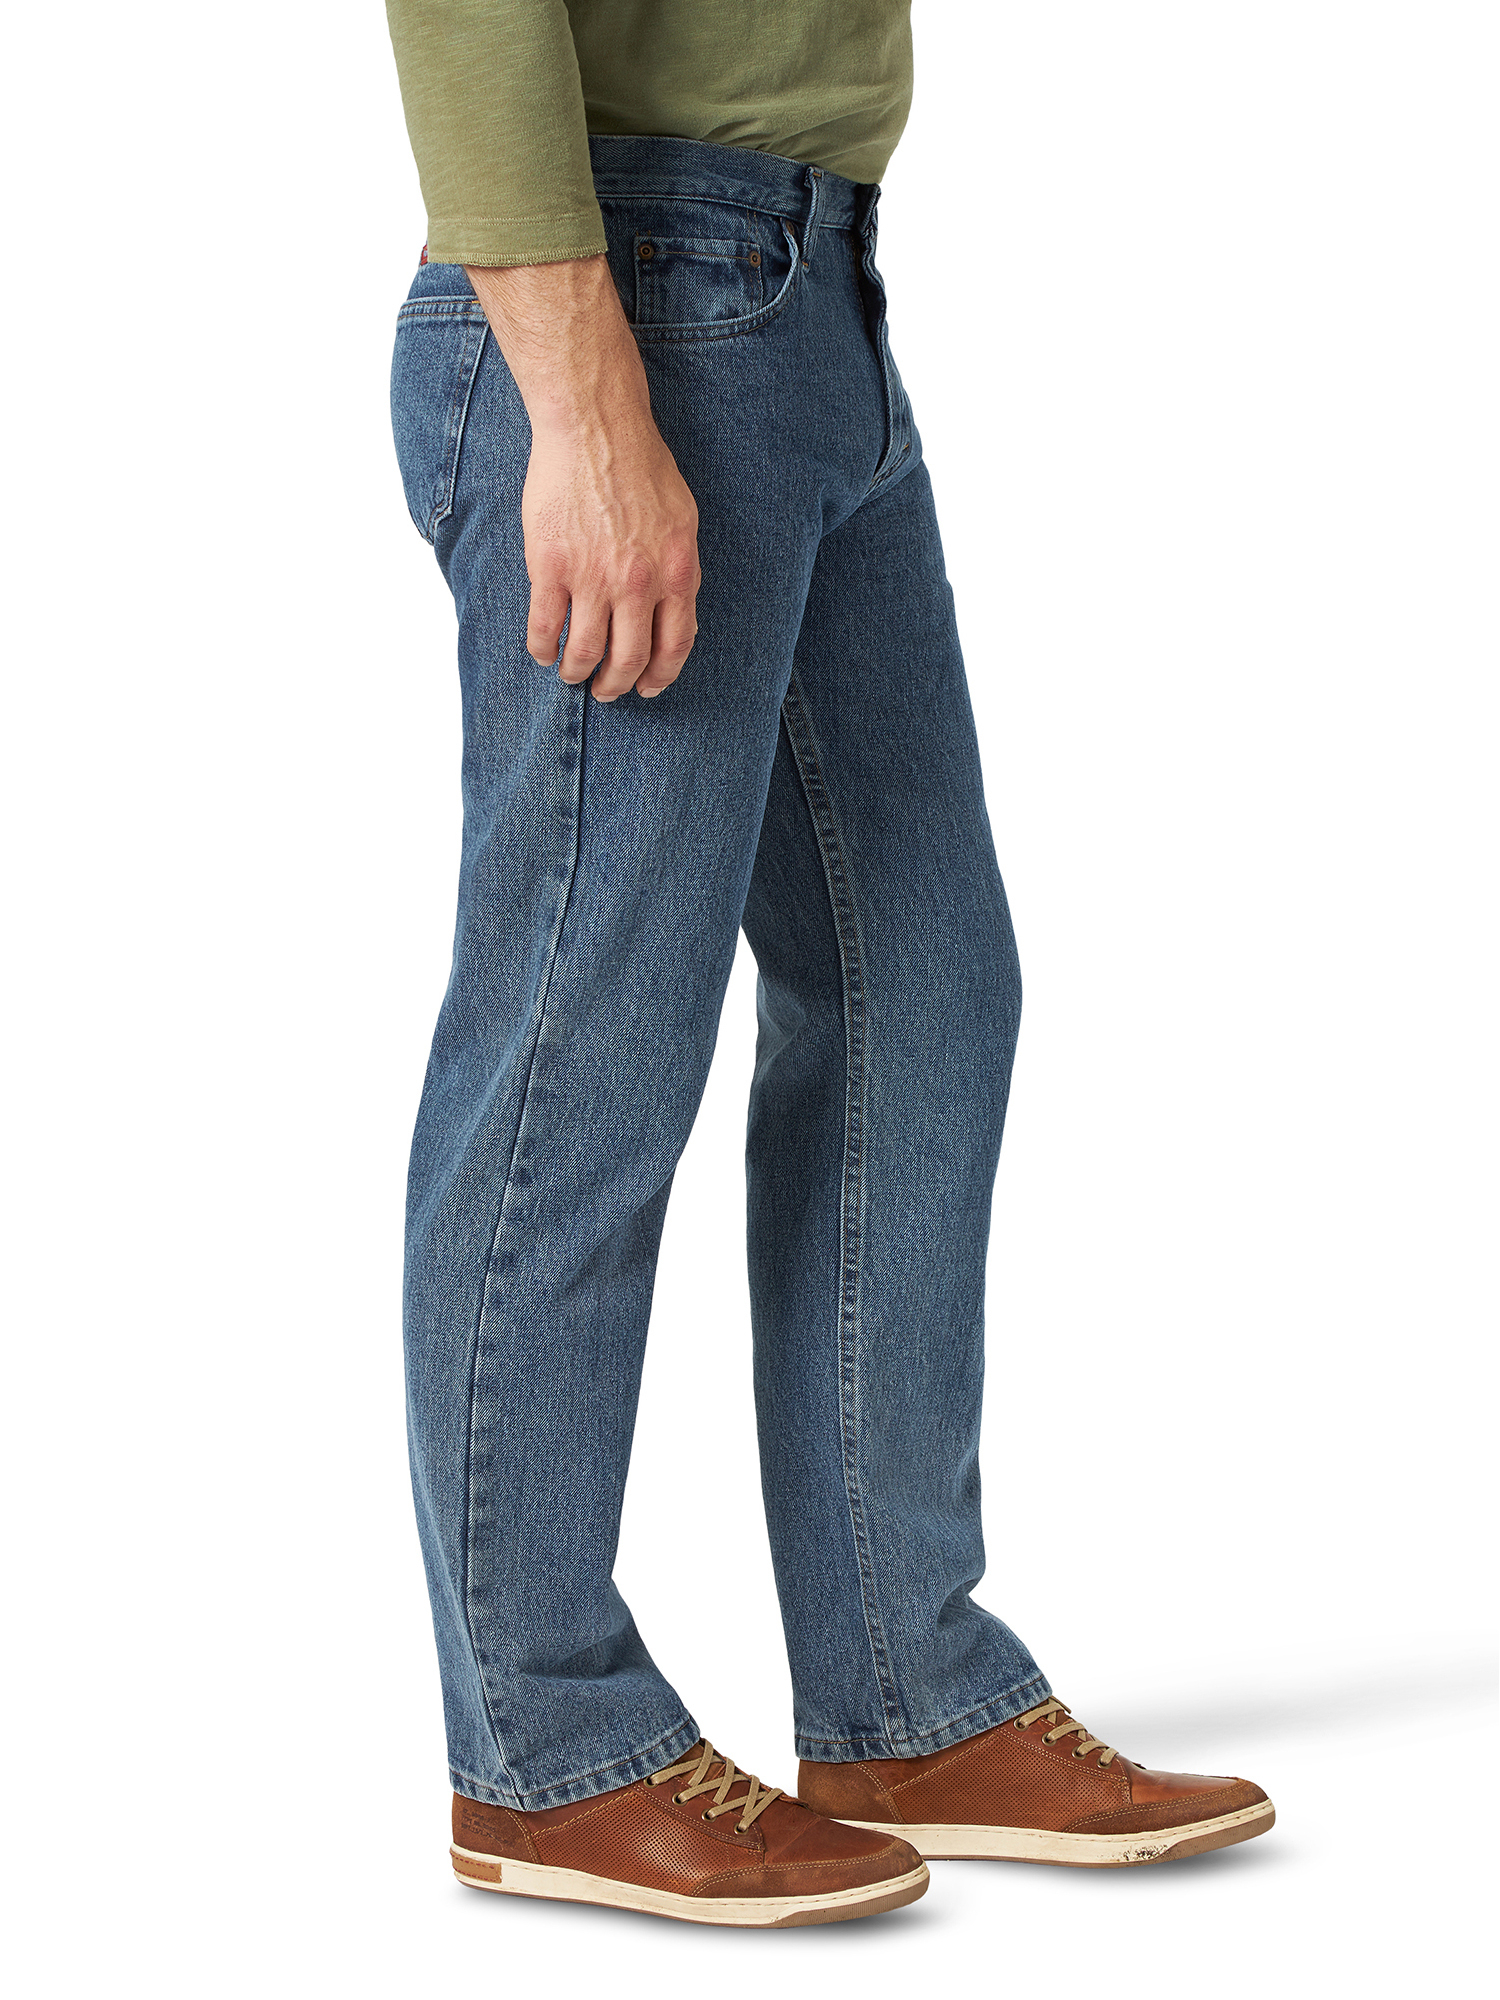 Wrangler Men's and Big Men's Relaxed Fit Jeans - image 5 of 5